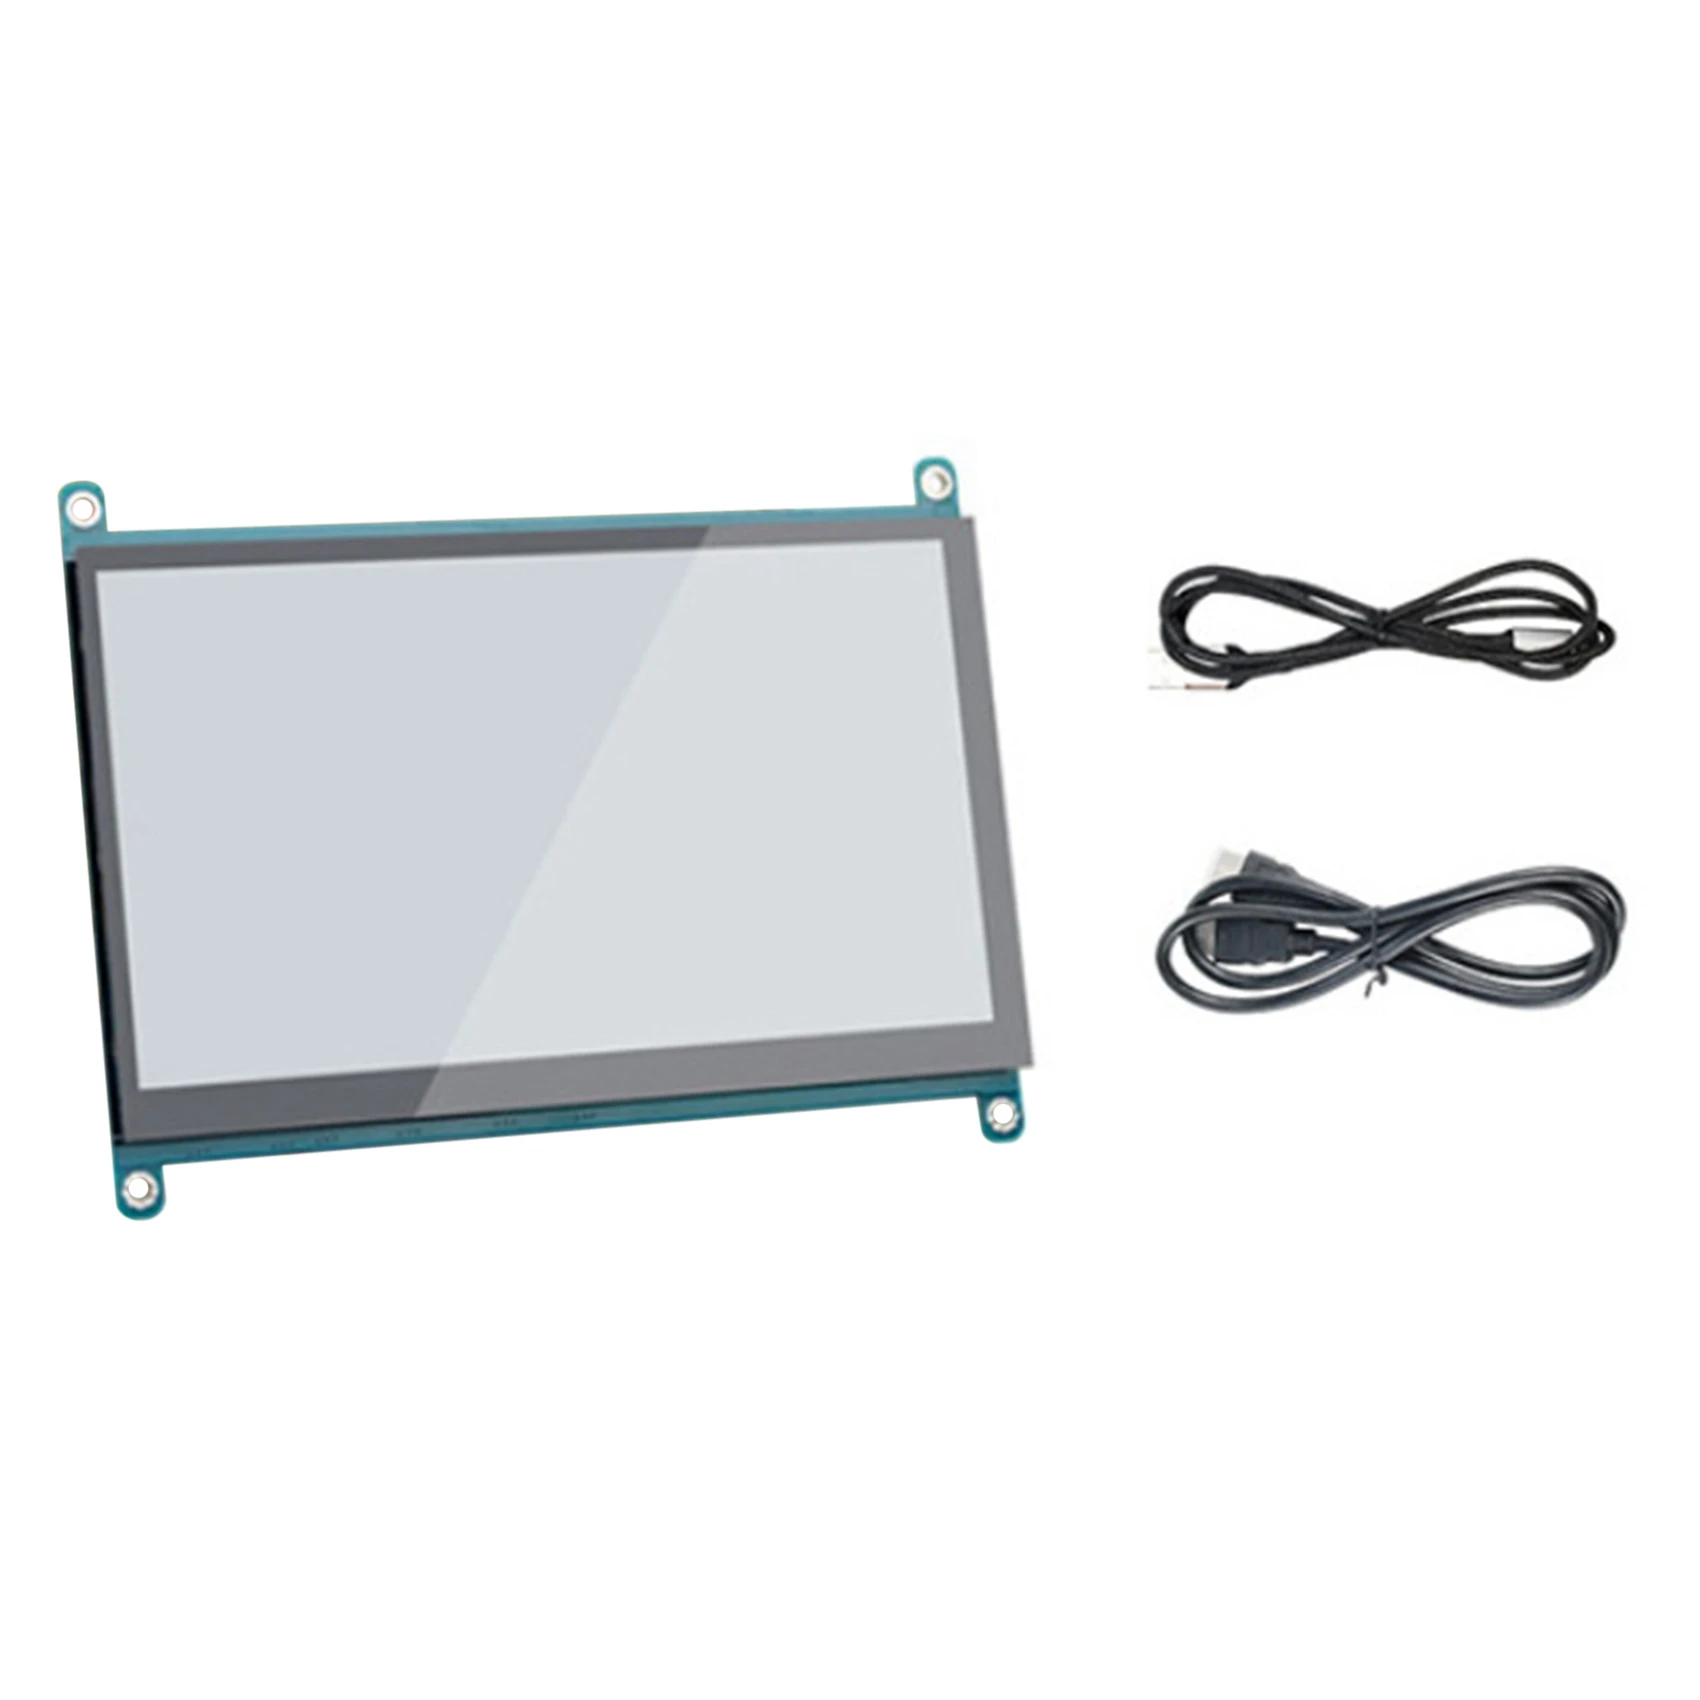 

7 Inch IPS Capacitive Touch Screen Monitor 1024X600 HD Display HDMI-Compatible VGA Interface Display for Raspberry Pi